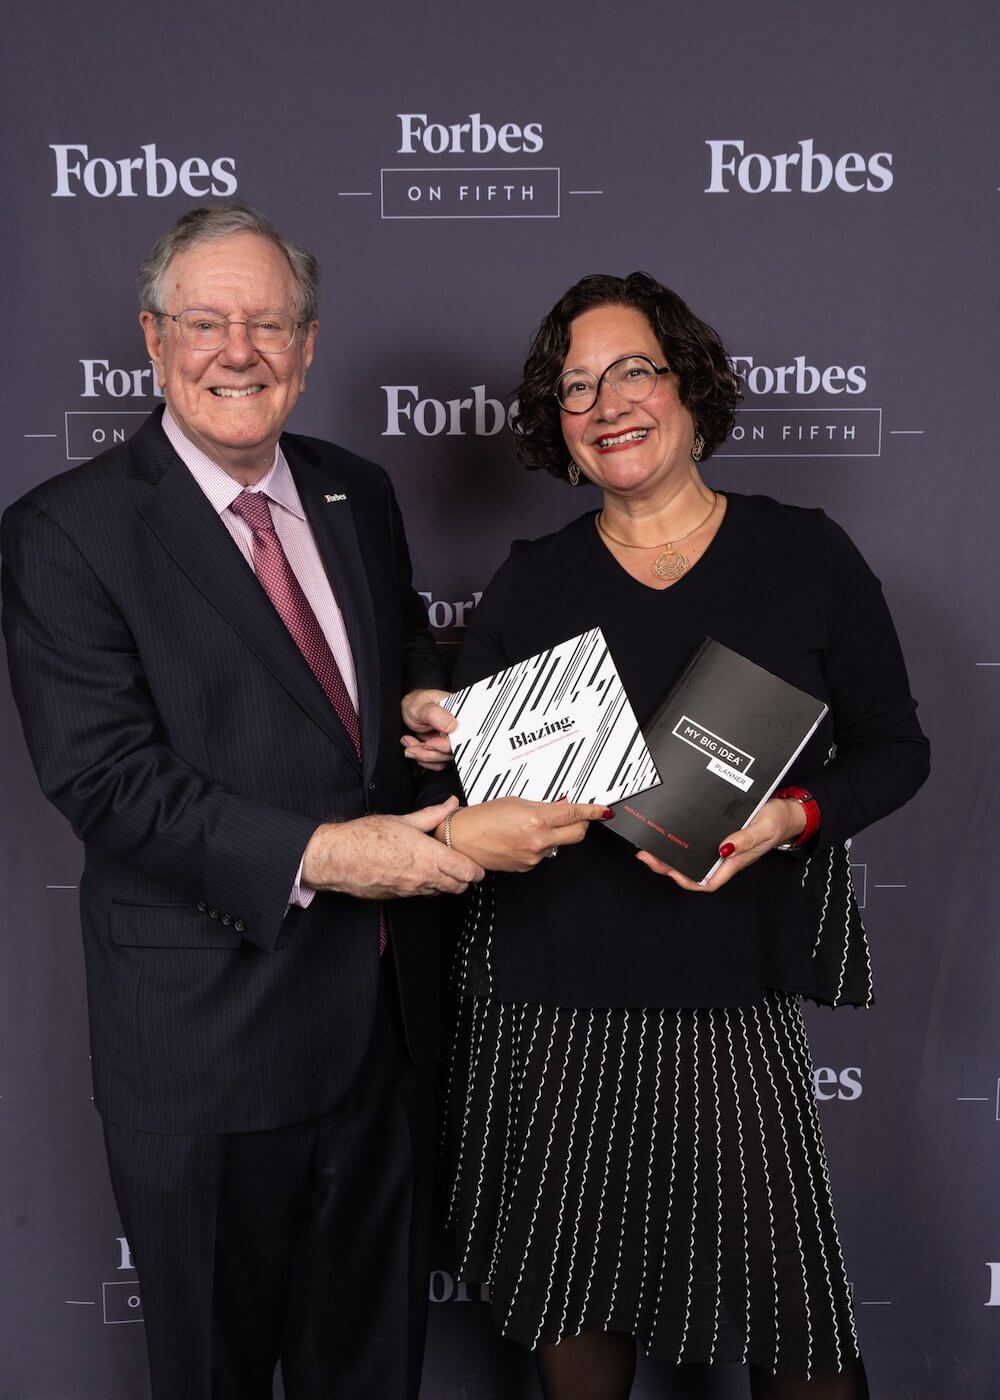 Michele Bailey with Steve Forbes